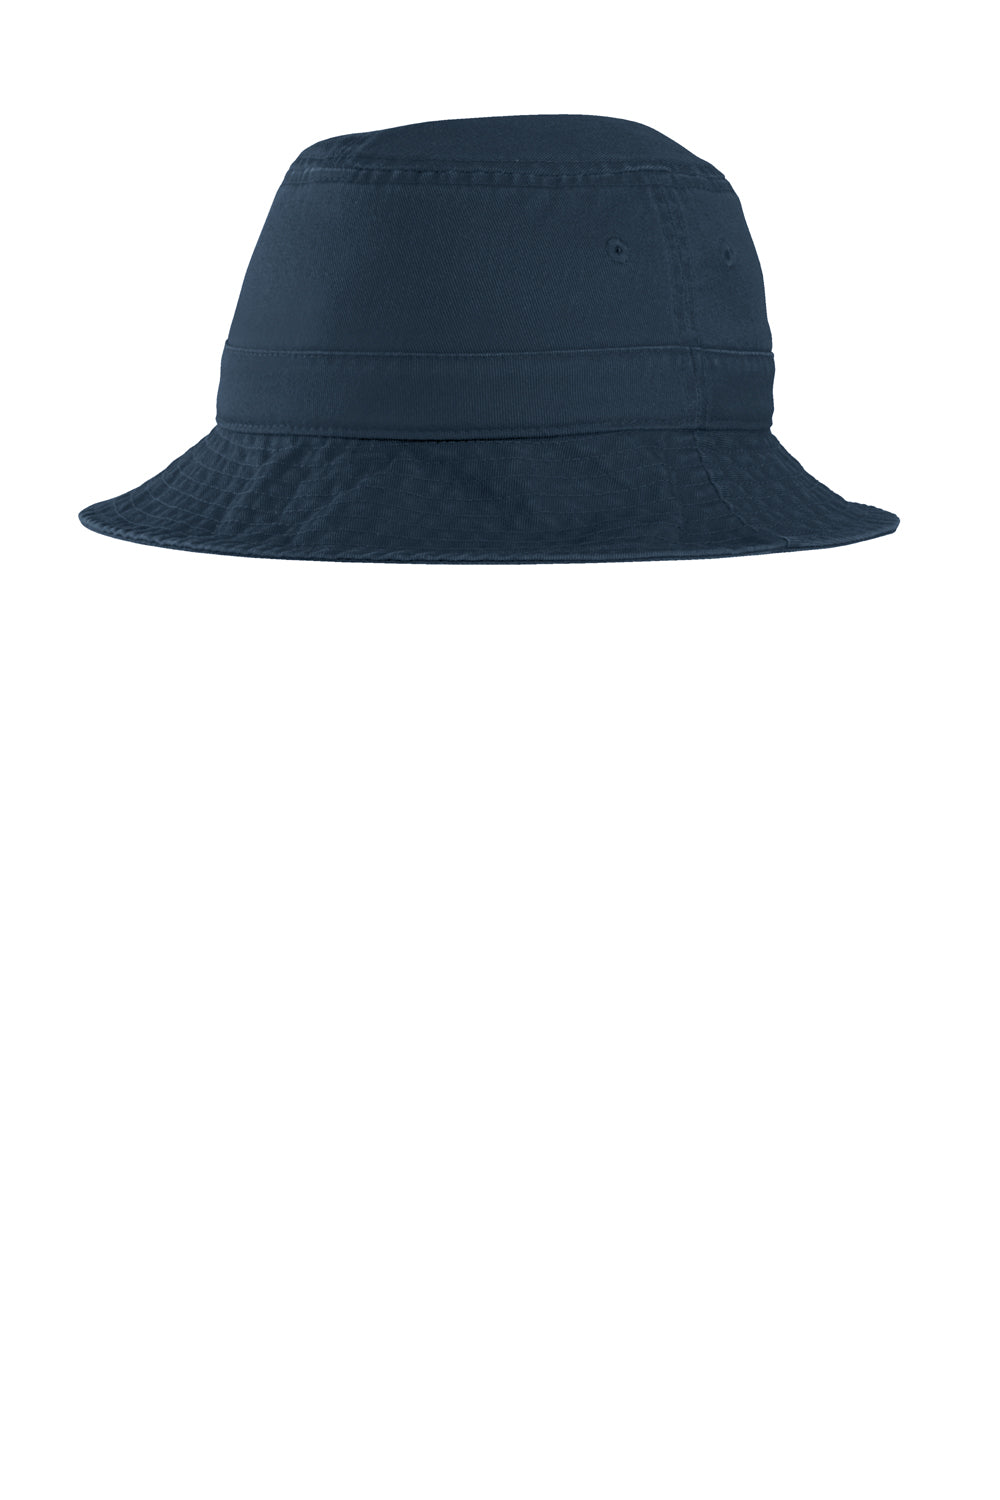 Port Authority PWSH2 Mens Bucket Hat Navy Blue Front